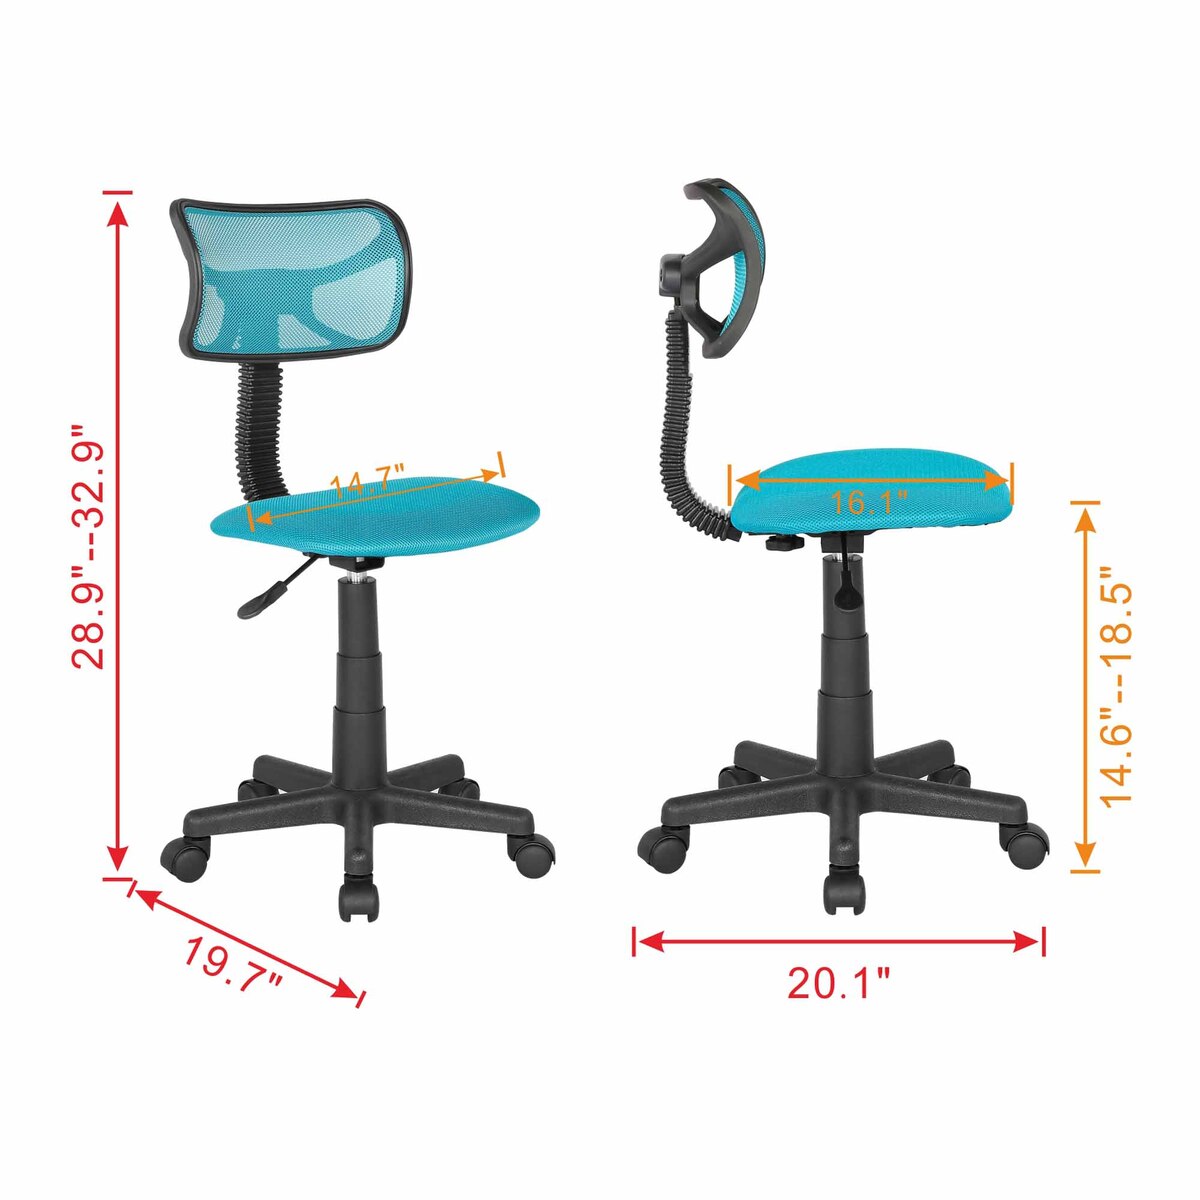 Maple Leaf Adjustable Kids Chair, Office, Computer Chair for Students With Swivel Wheels Hello Gorgeous WK656640